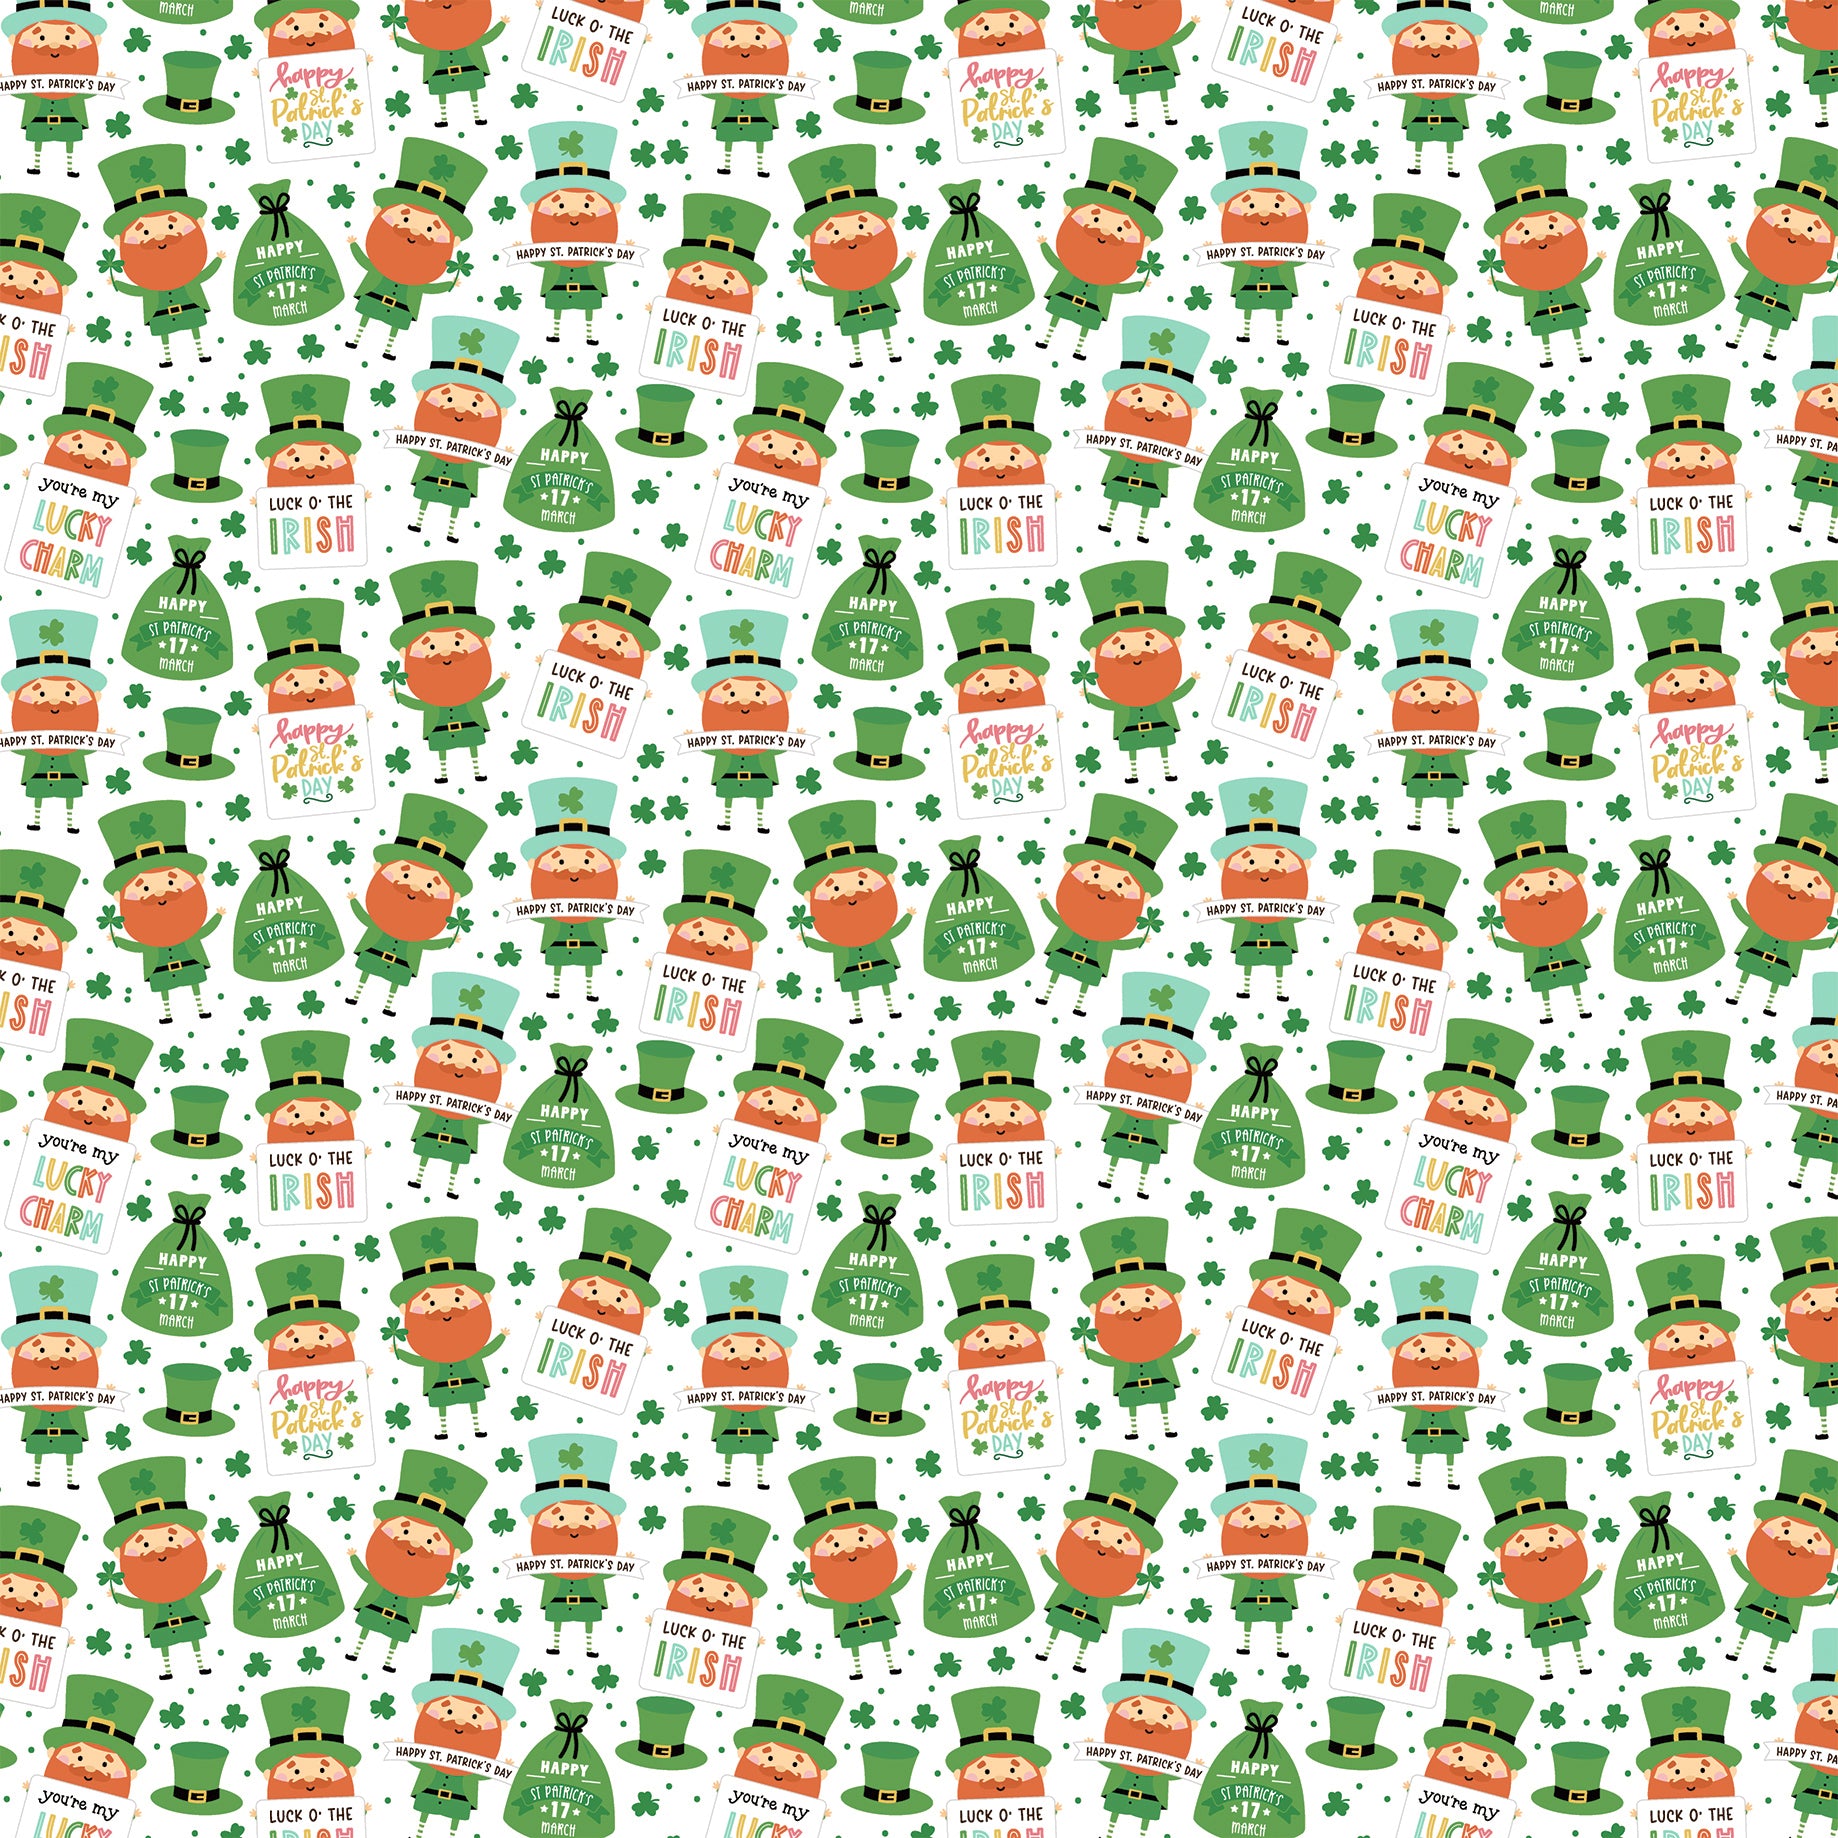 Happy St. Patrick's Day Collection You're My Lucky Charm 12 x 12 Double-Sided Scrapbook Paper by Echo Park Paper